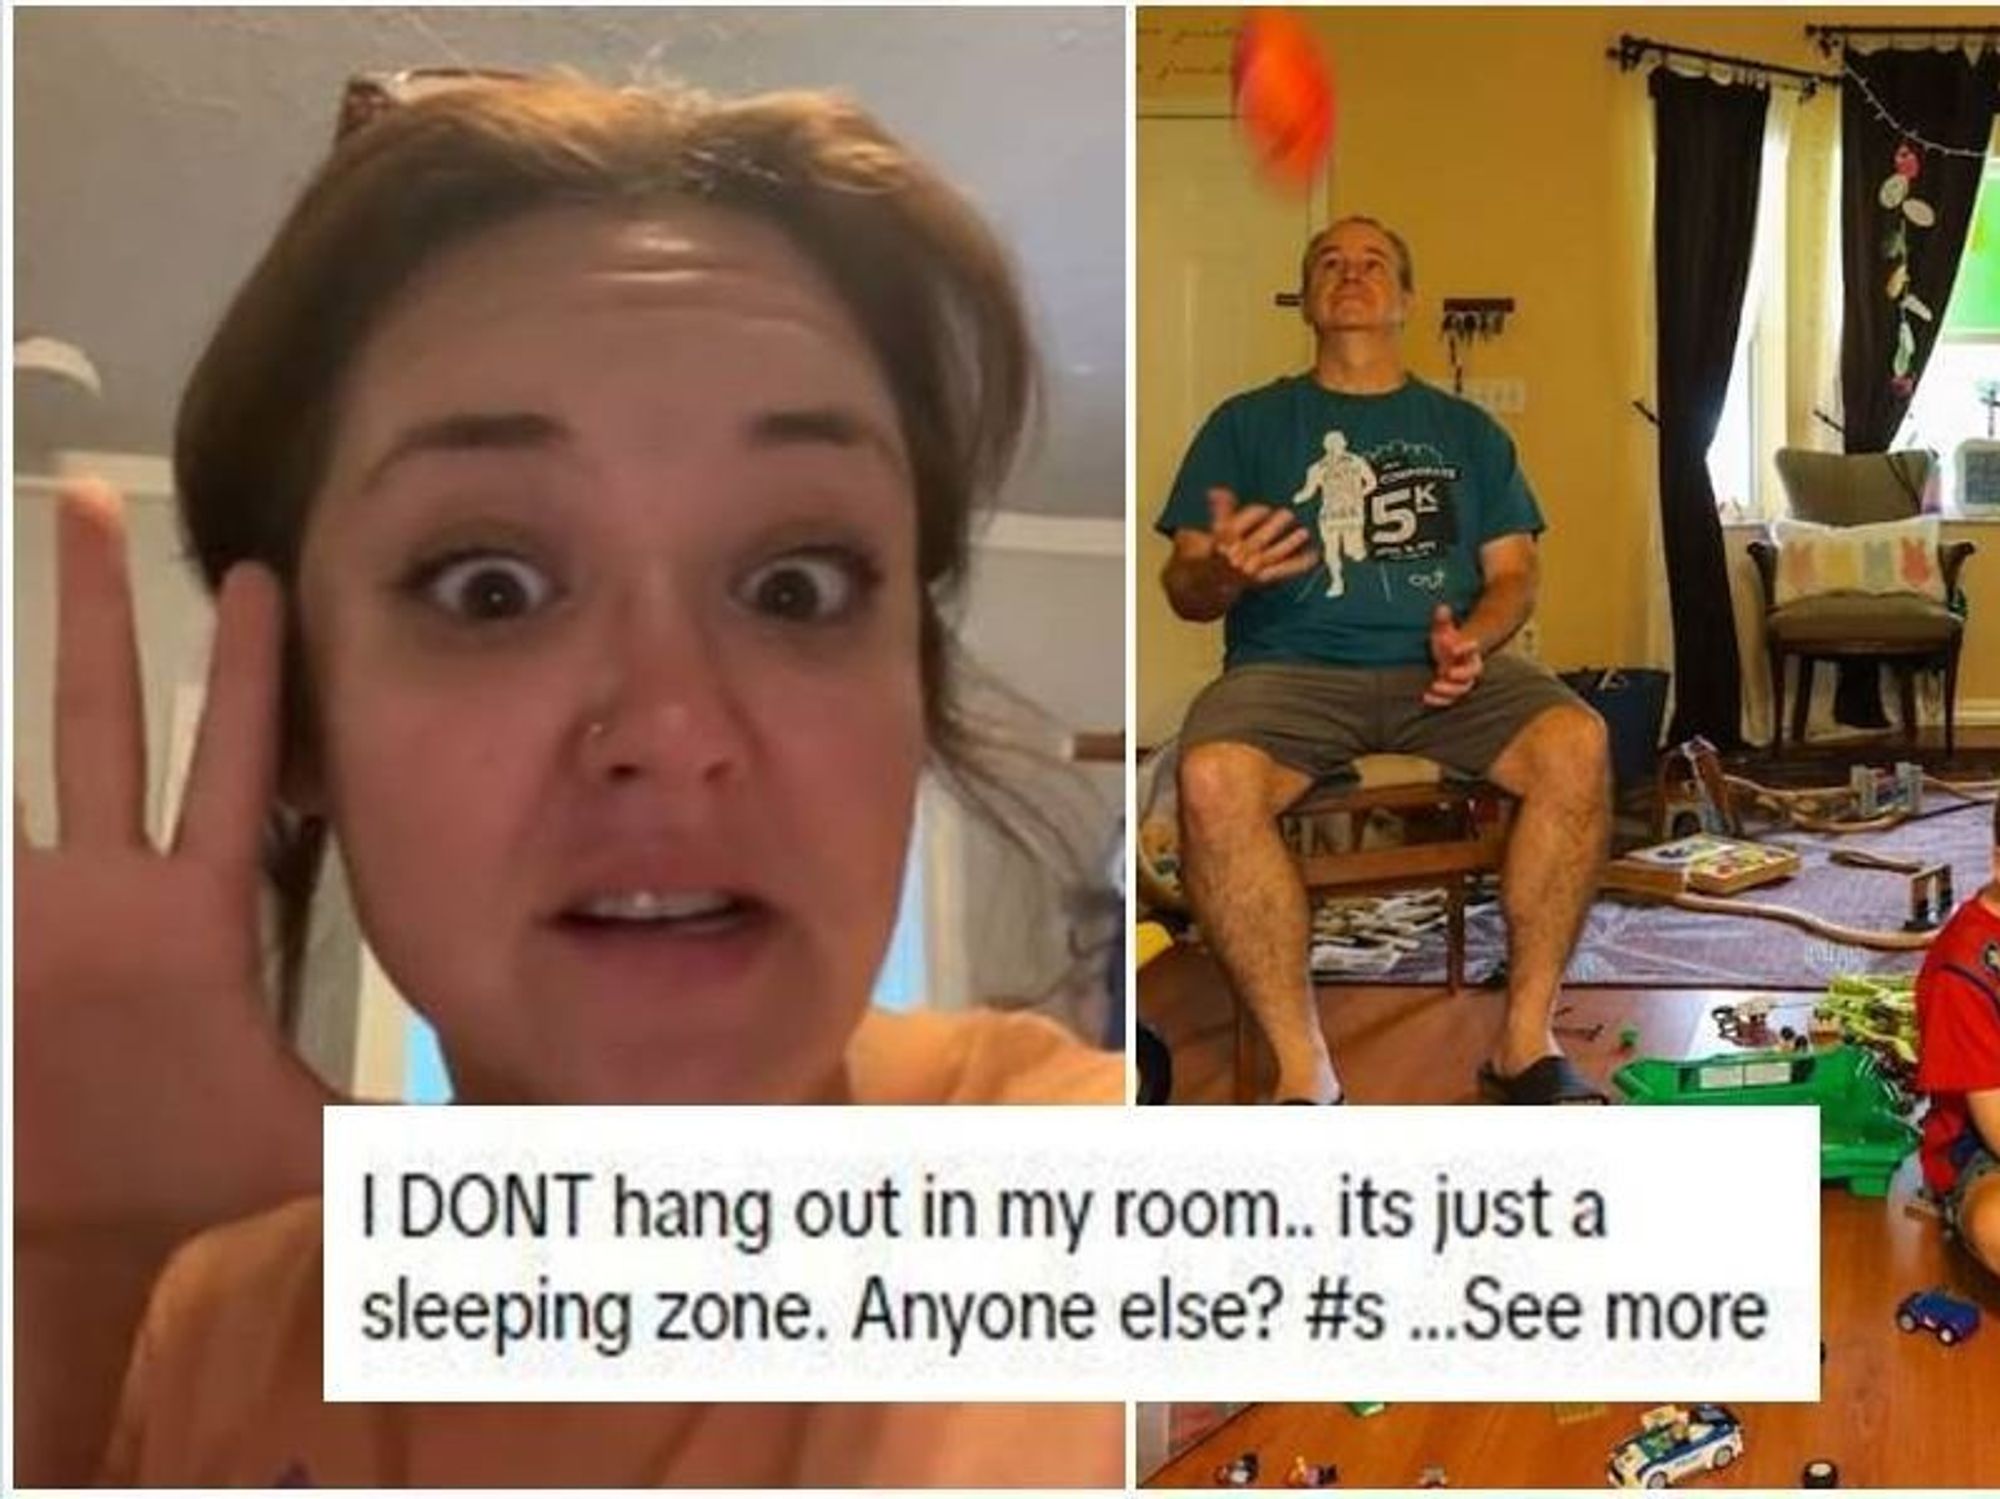 Bedroom or living room parent? Mom sparks debate over where parents hang out in the house.